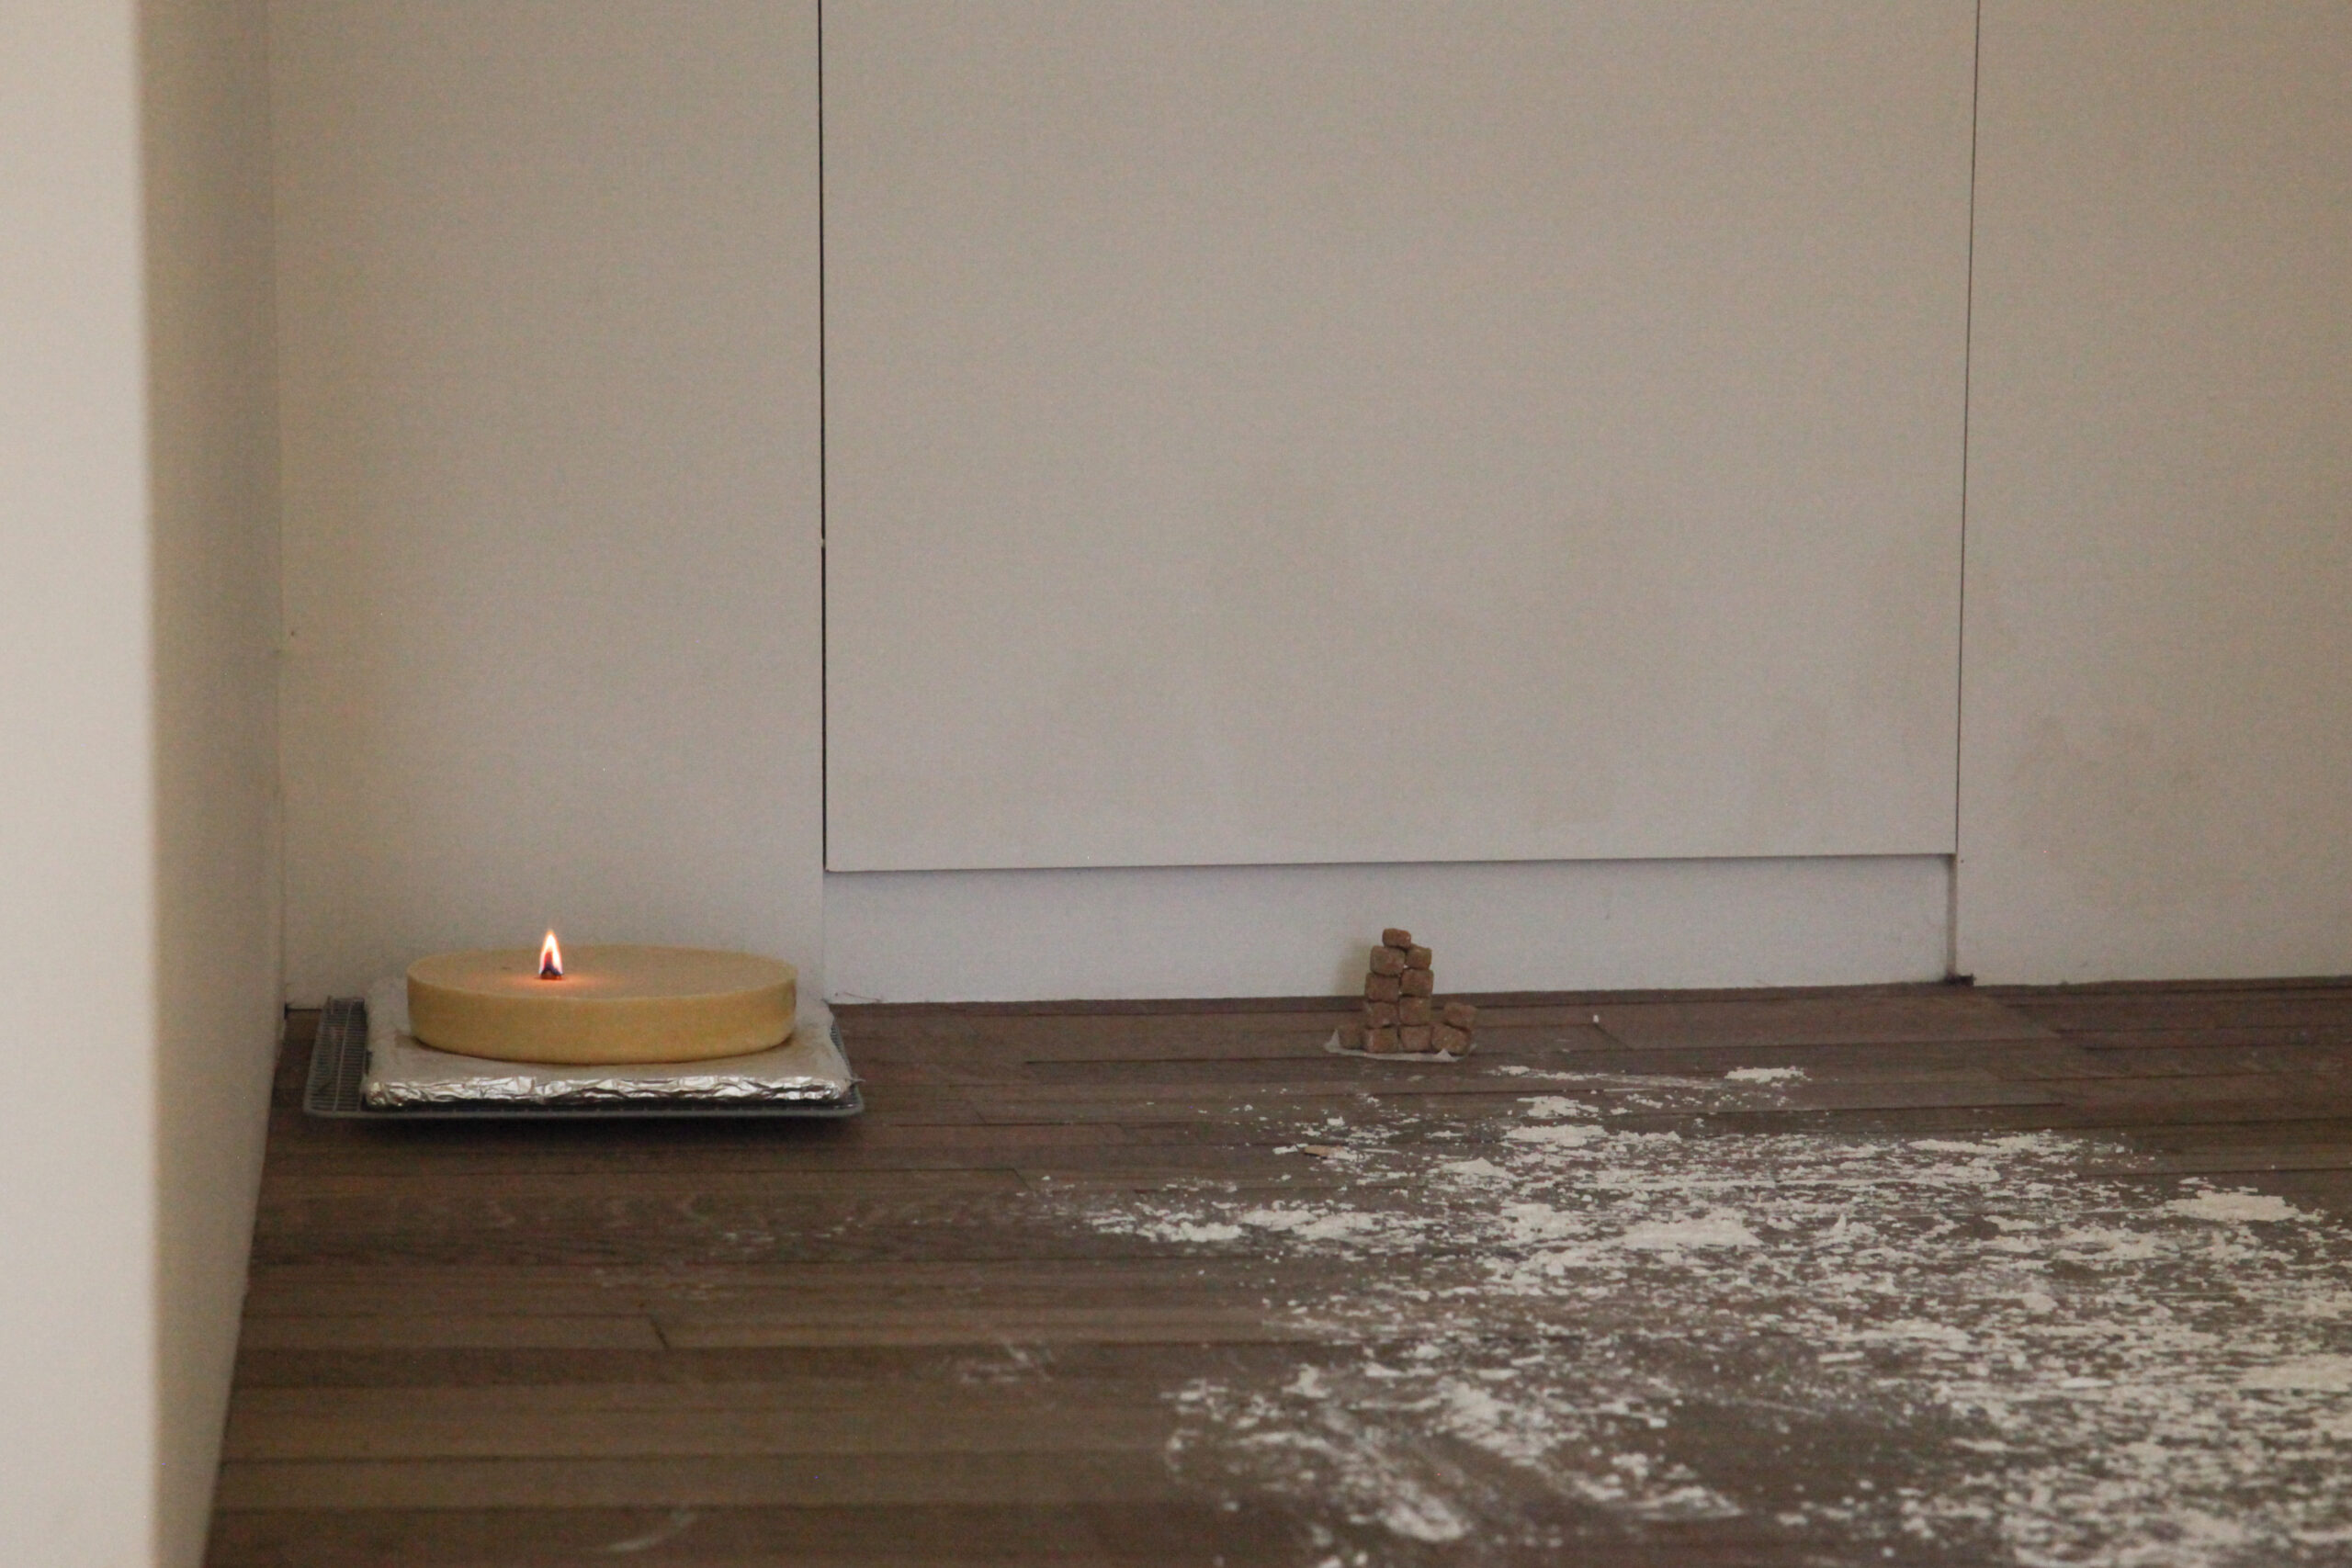 A room with white walls and brown hardwood floors. In the corner is a cake-shaped candle on top of an aluminum foil-wrapped tray. A small flame is lit. Off to the right is a small stack of brown sugar cubes which form a tower. Flour is dusted across the floor.